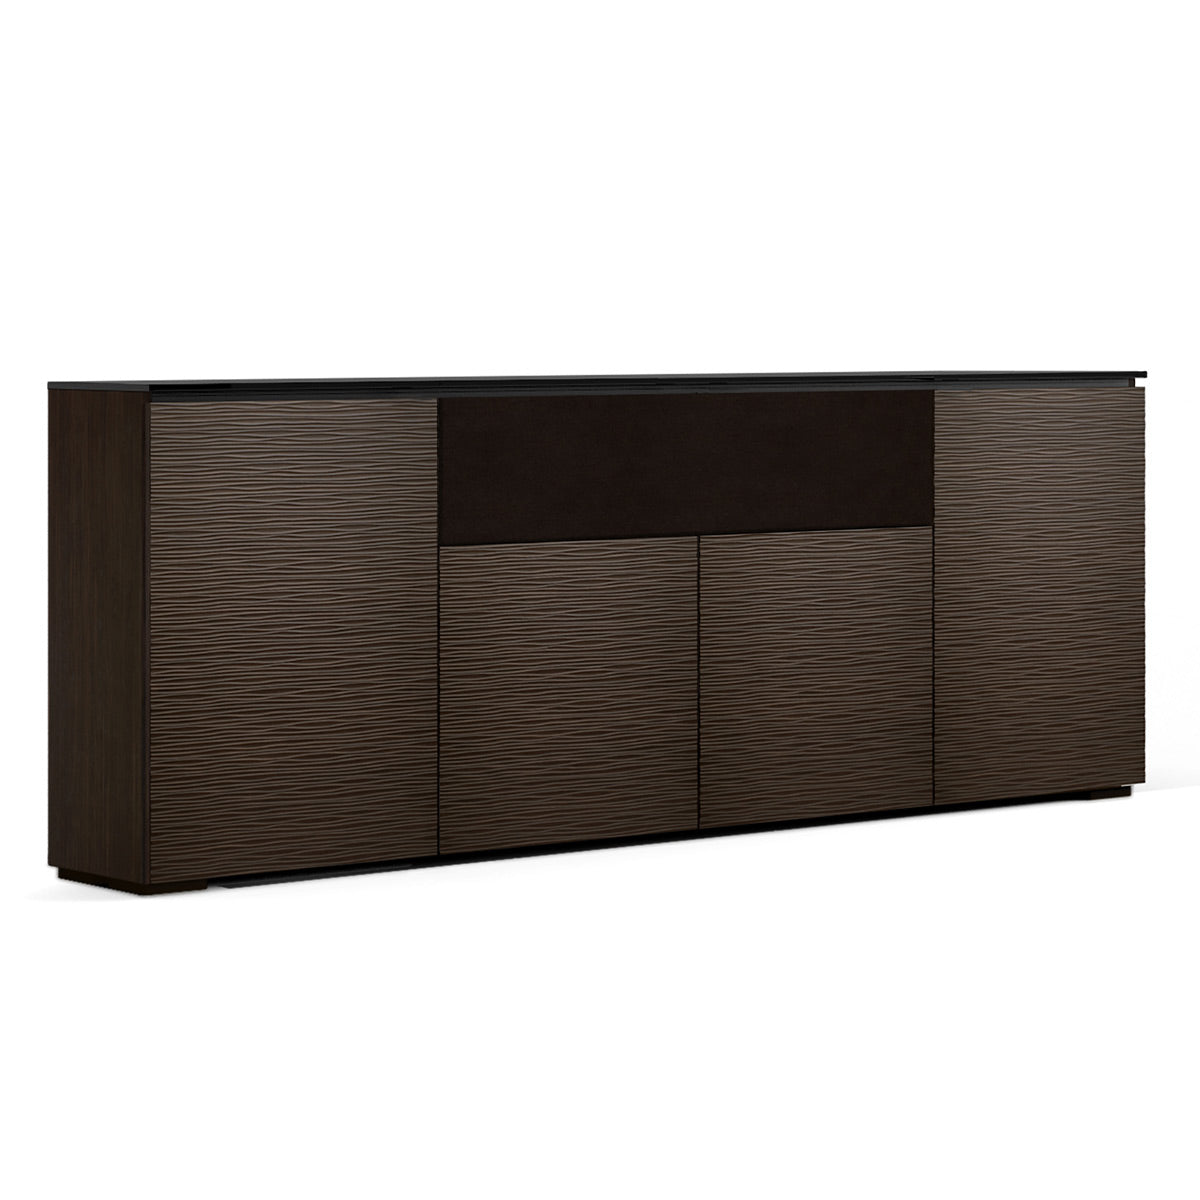 Salamander Chameleon Collection Berlin Low Profile 345 Four-Bay AV Cabinet with Speaker Compartment (Textured Wenge)